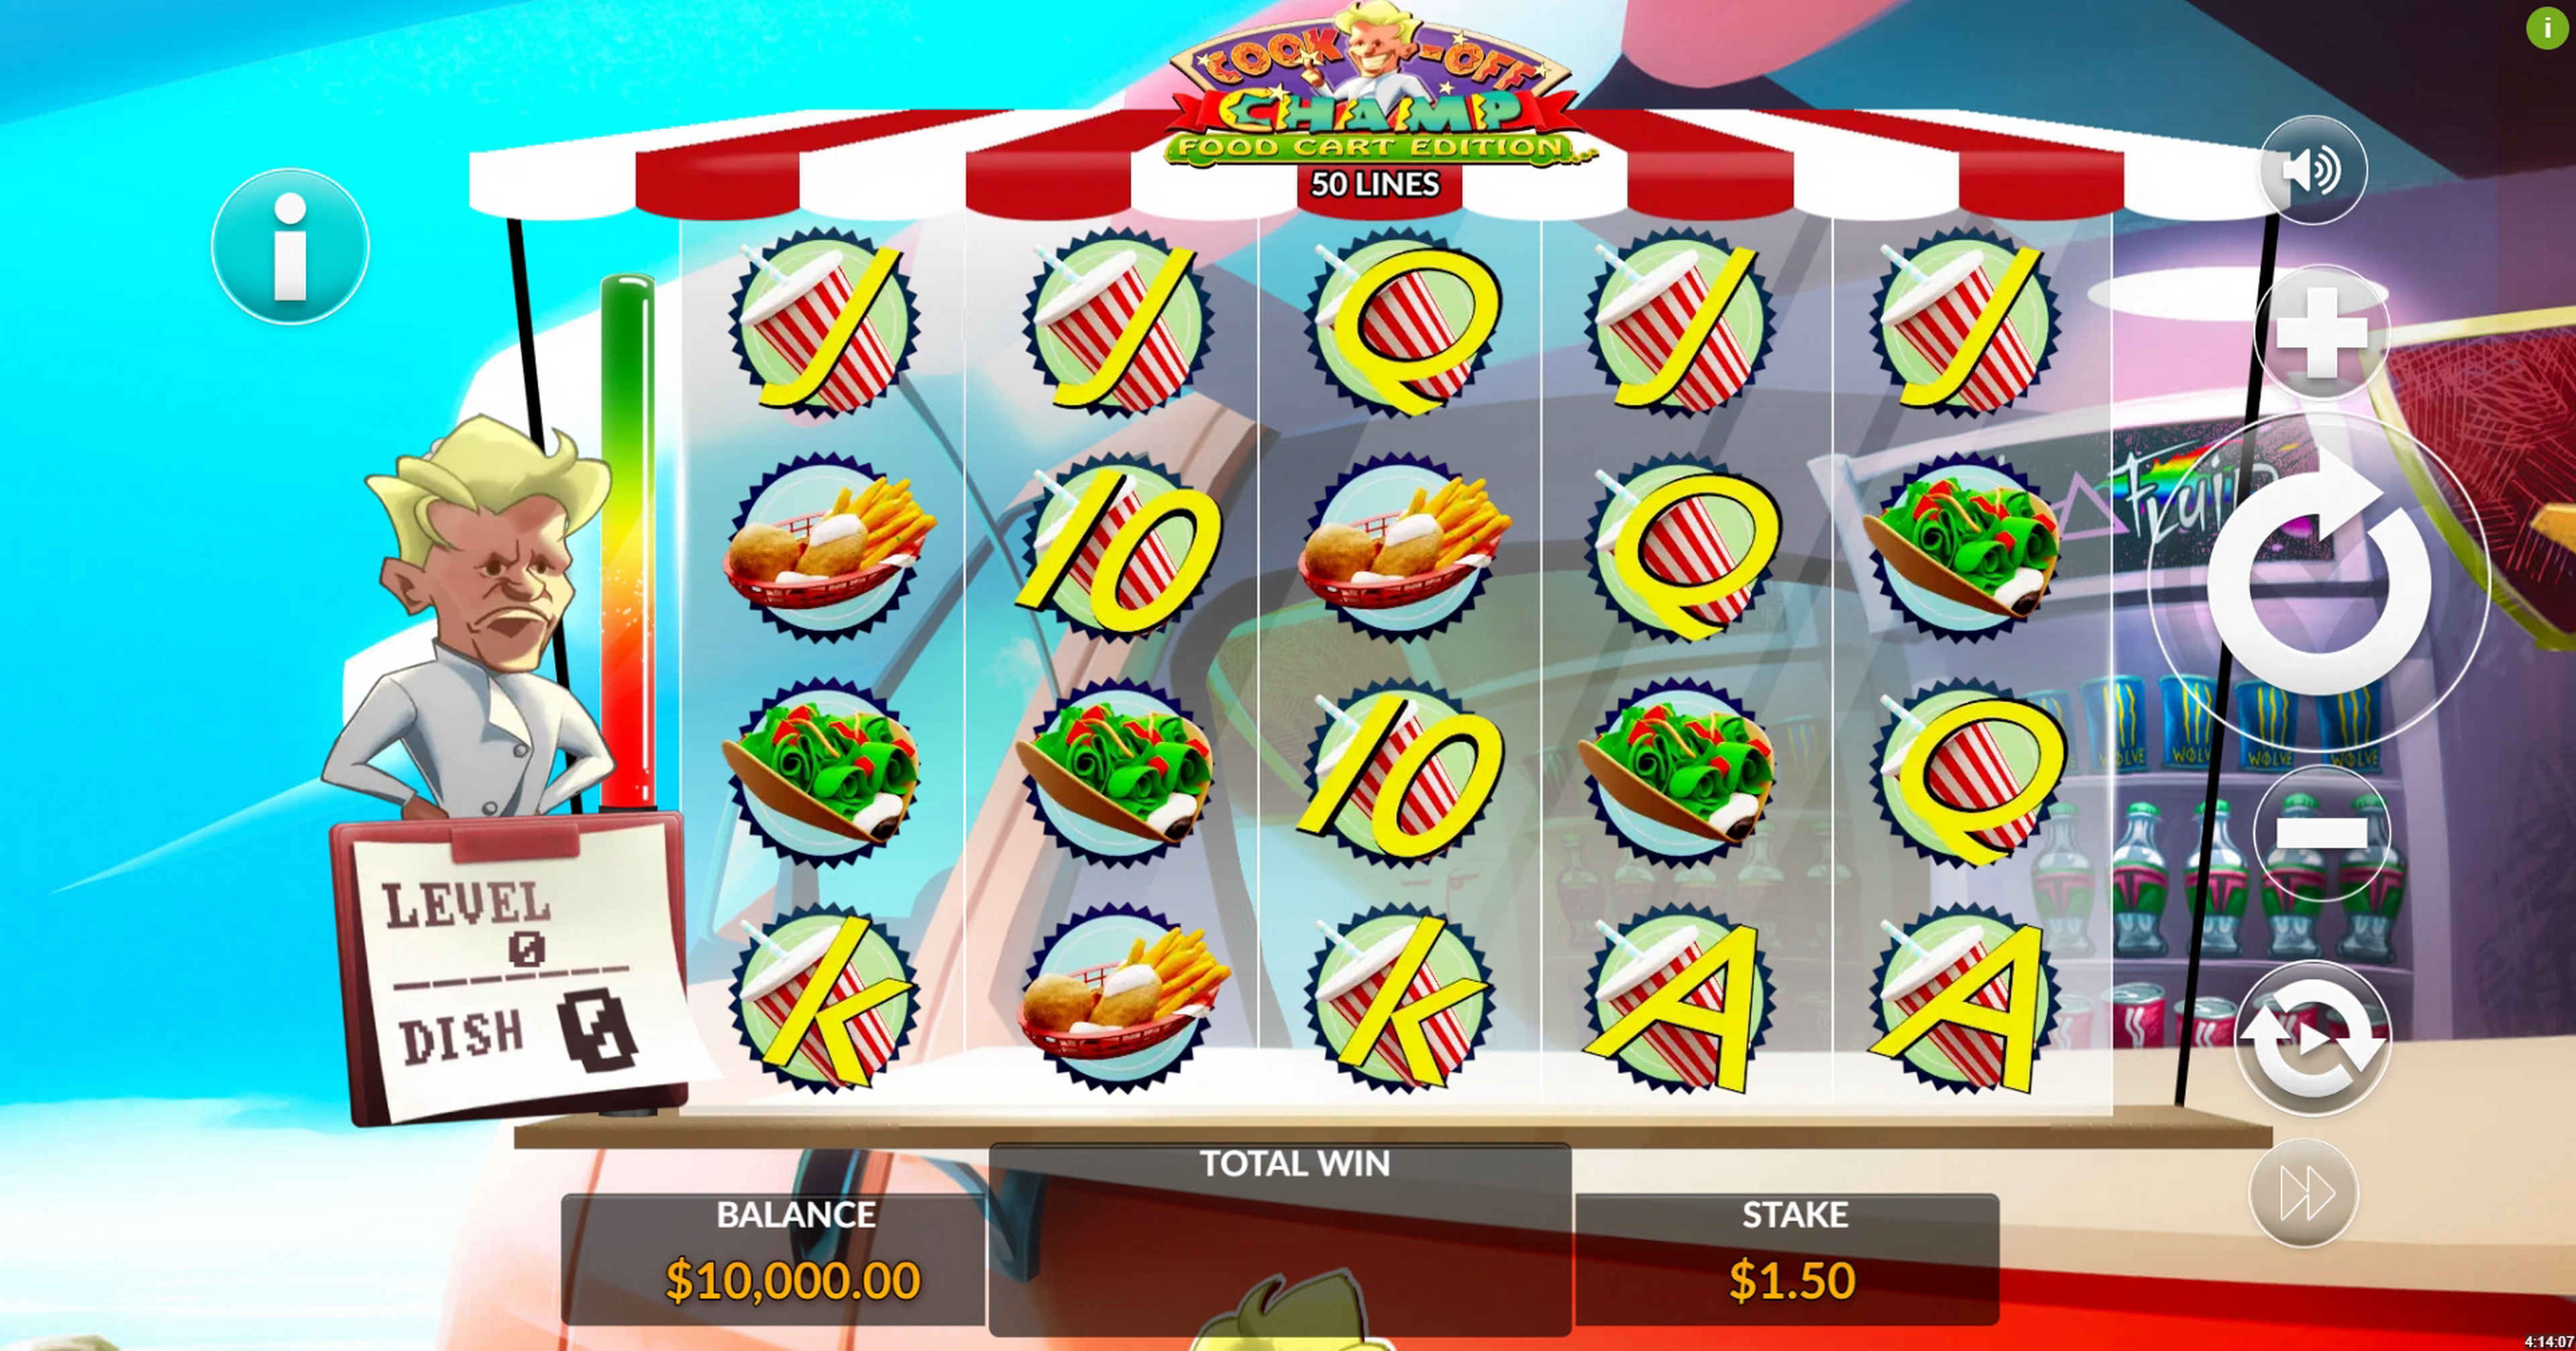 Reels in Cook-Off Champ Slot Game by Maverick